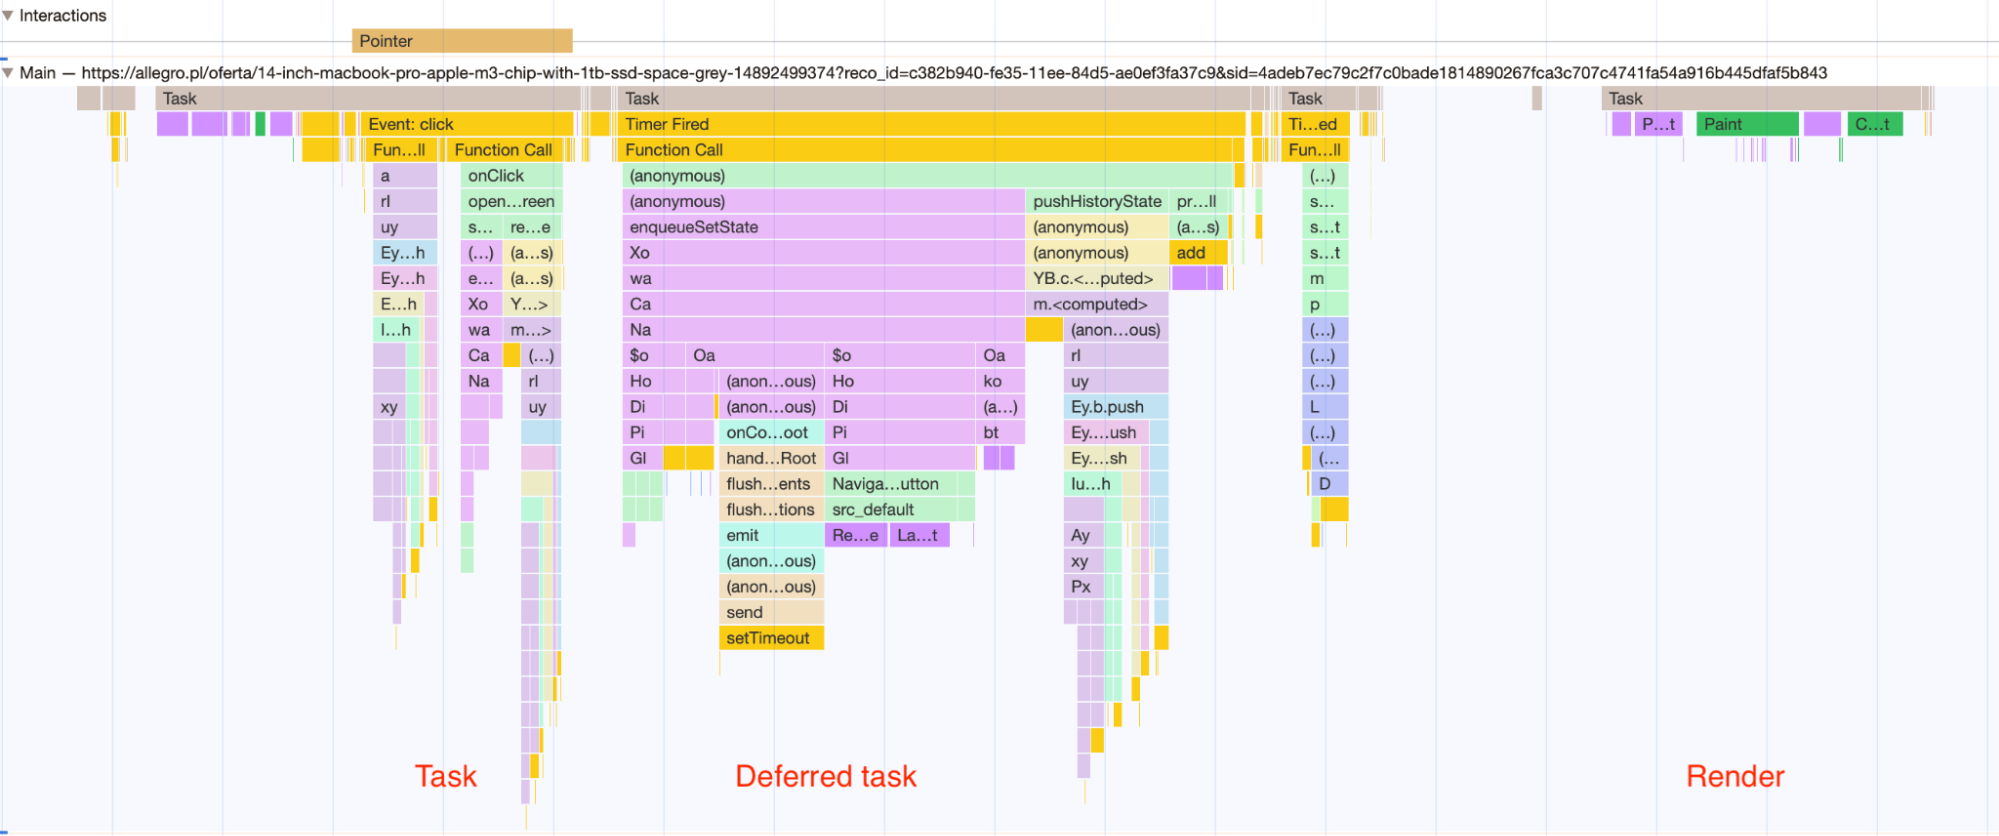 Example 3. Deferred task executed just after the first task before the rendering process.